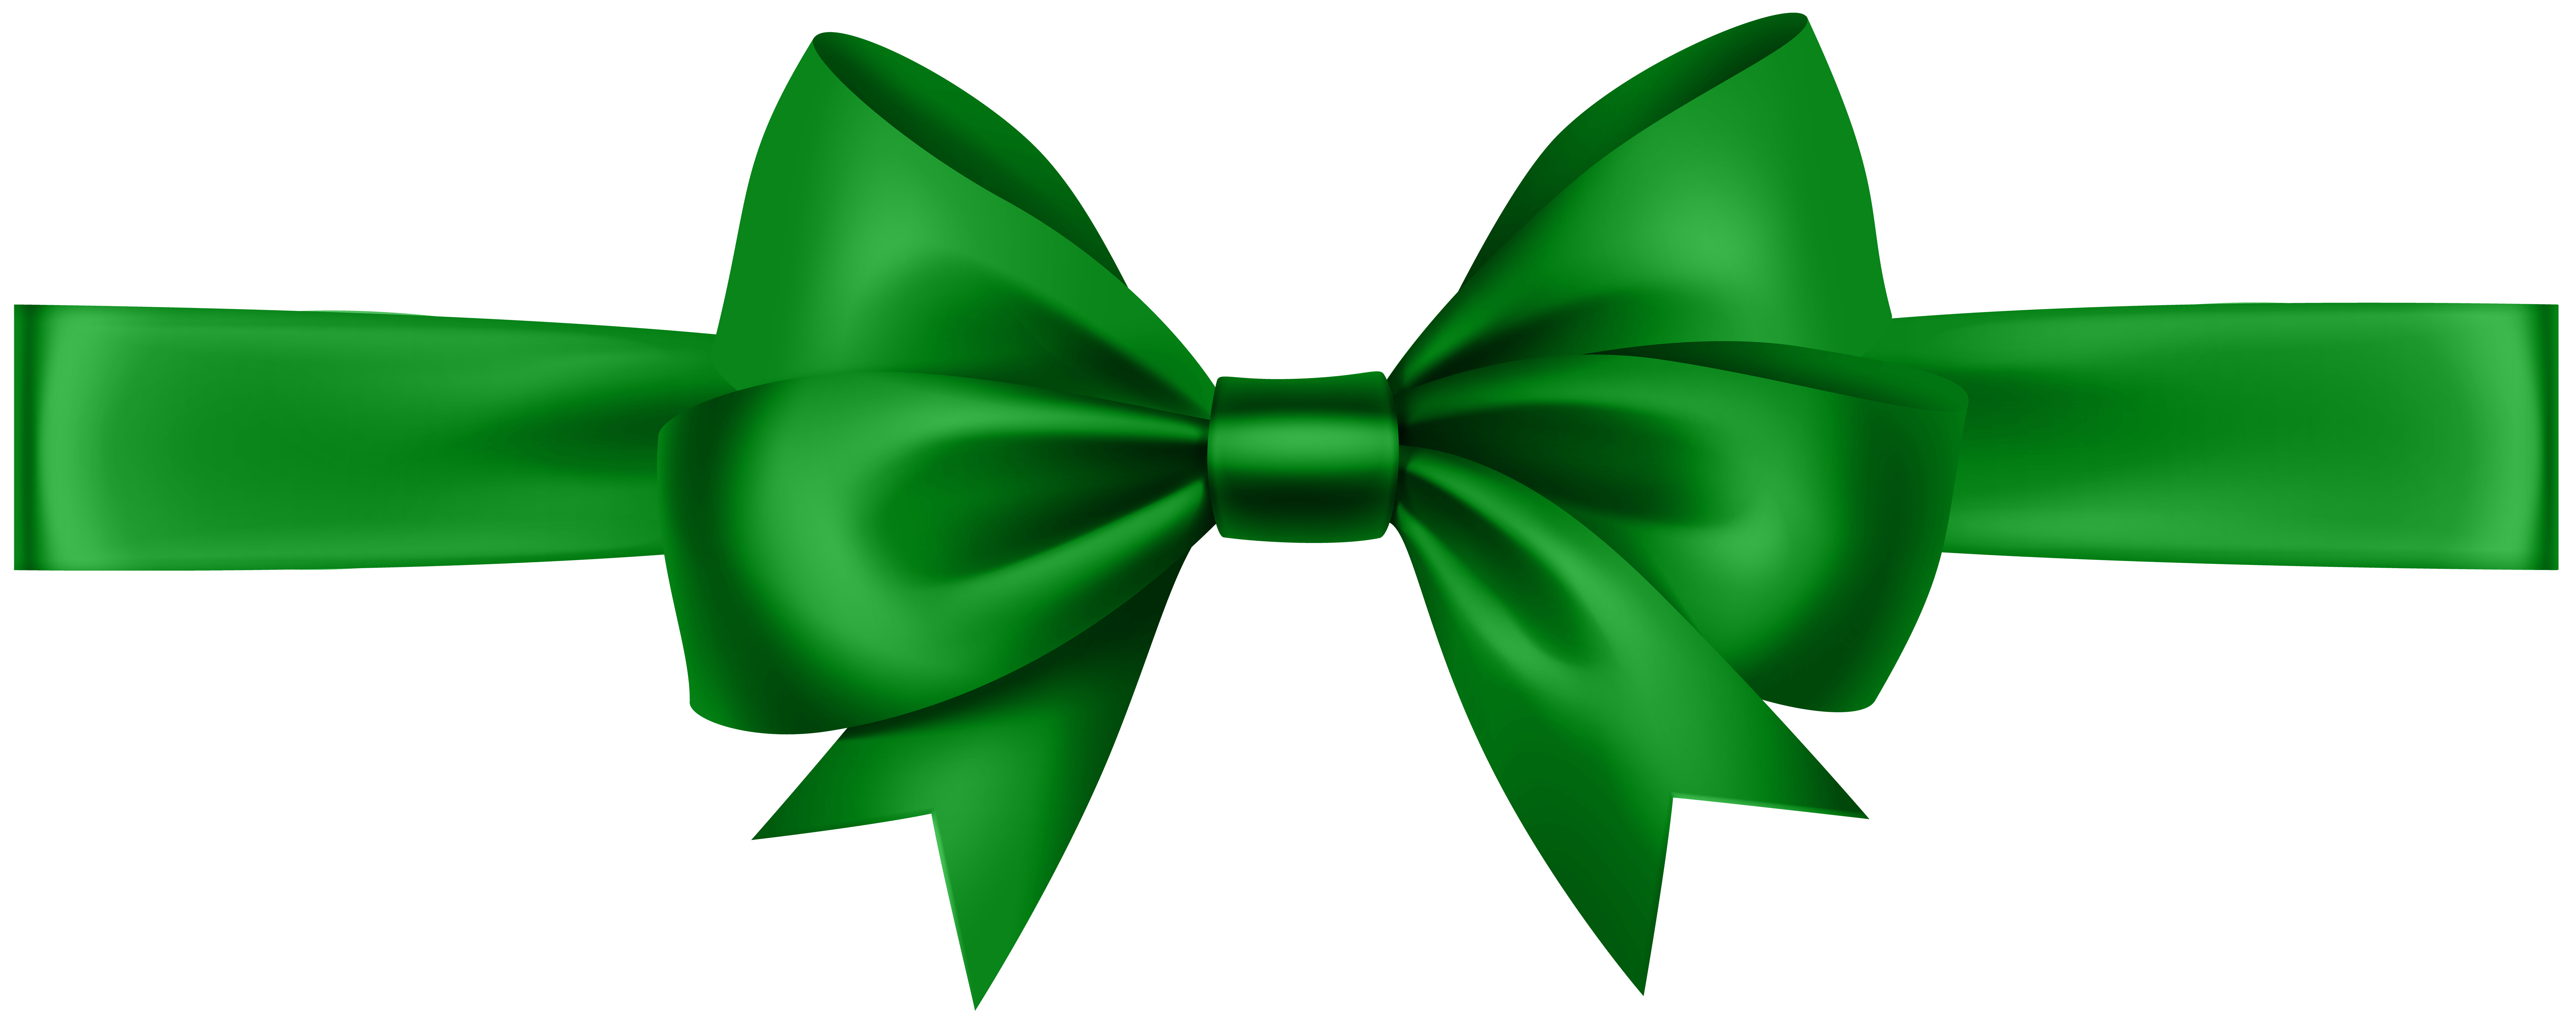 Ribbon with Bow Green Transparent PNG Clip Art Image | Gallery ...